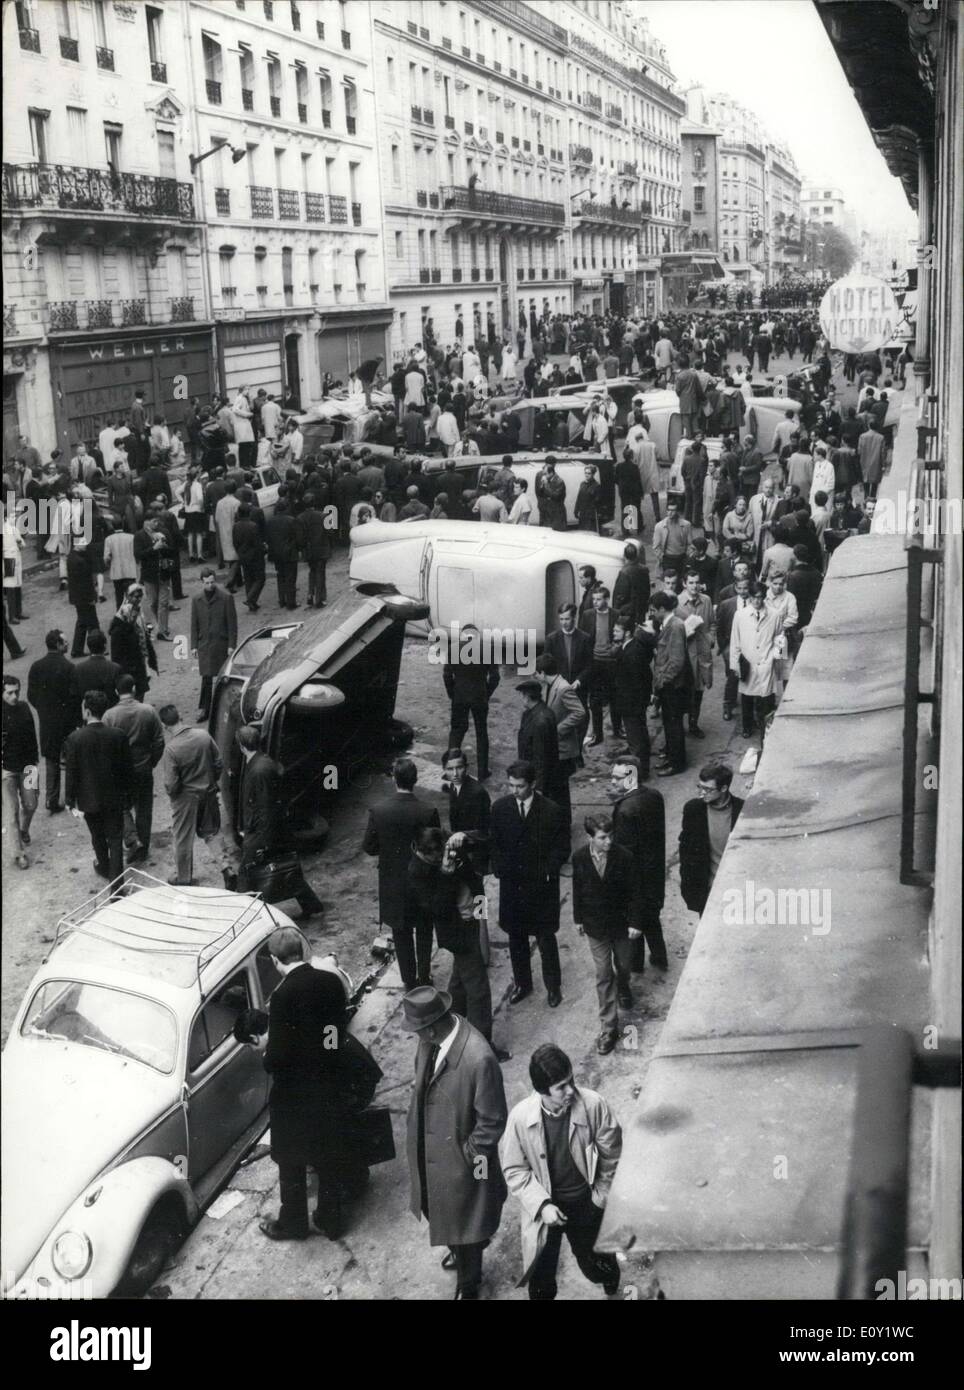 May 11, 1968 - Student Riot in Paris's Latin Quarter Leads to Overturned Cars Stock Photo